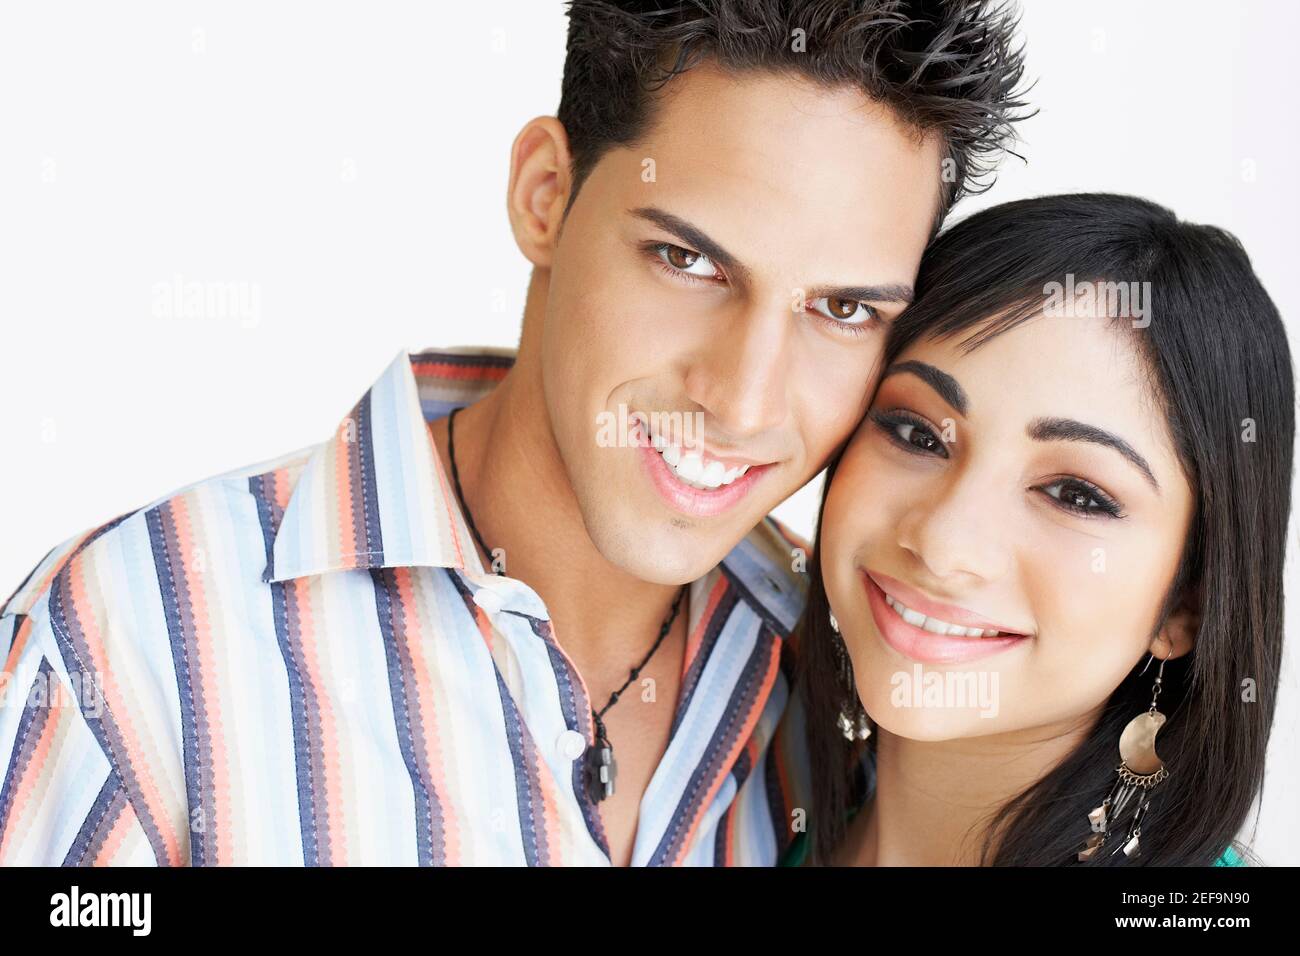 Portrait of a young man and a teenage girl smiling Stock Photo